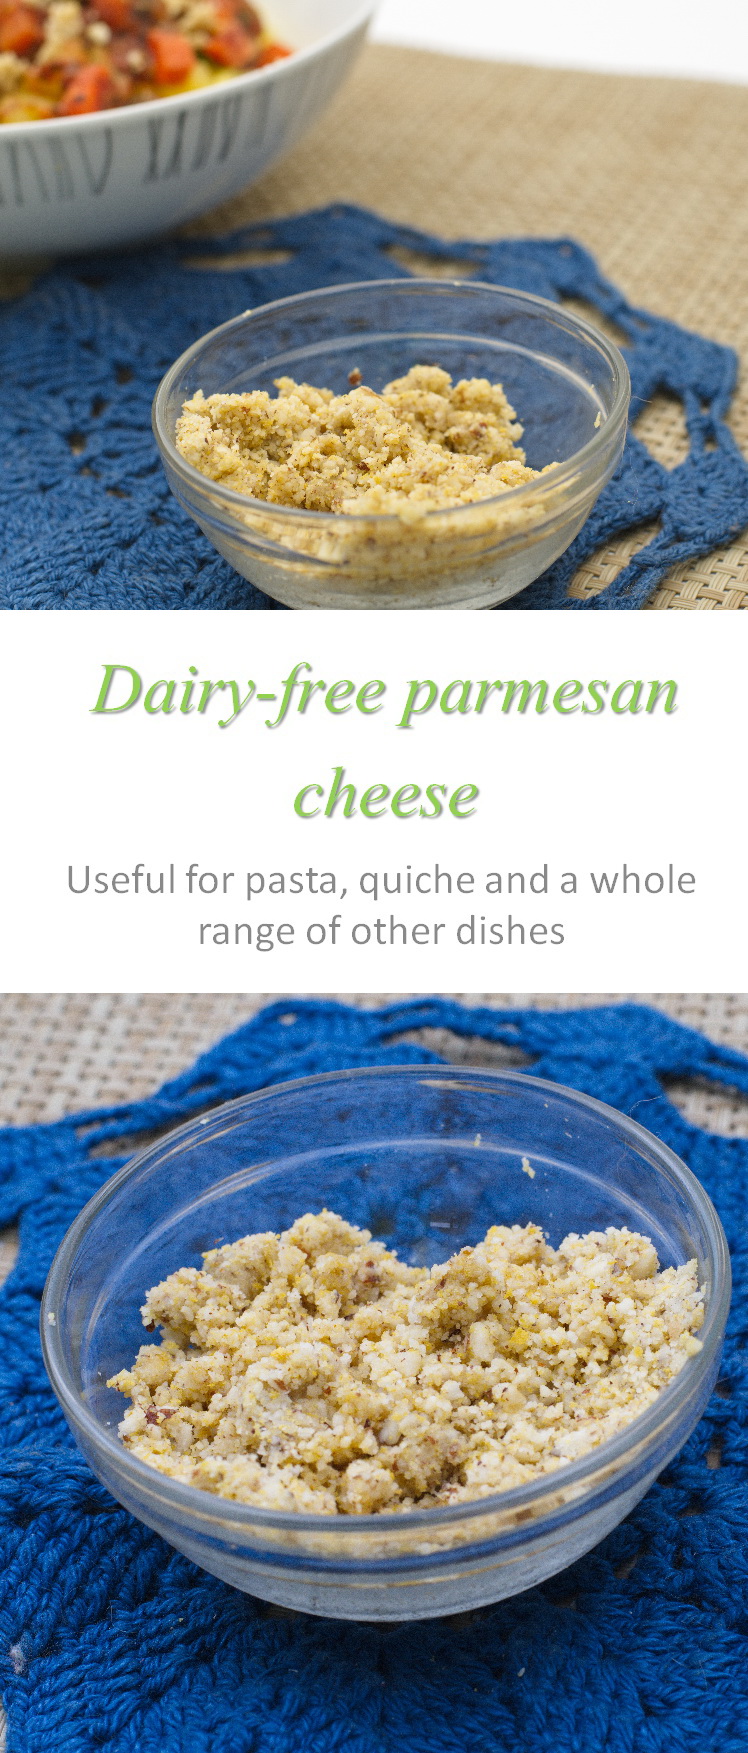 A simple way to substitute parmesan cheese for a non-dairy option #parmesan